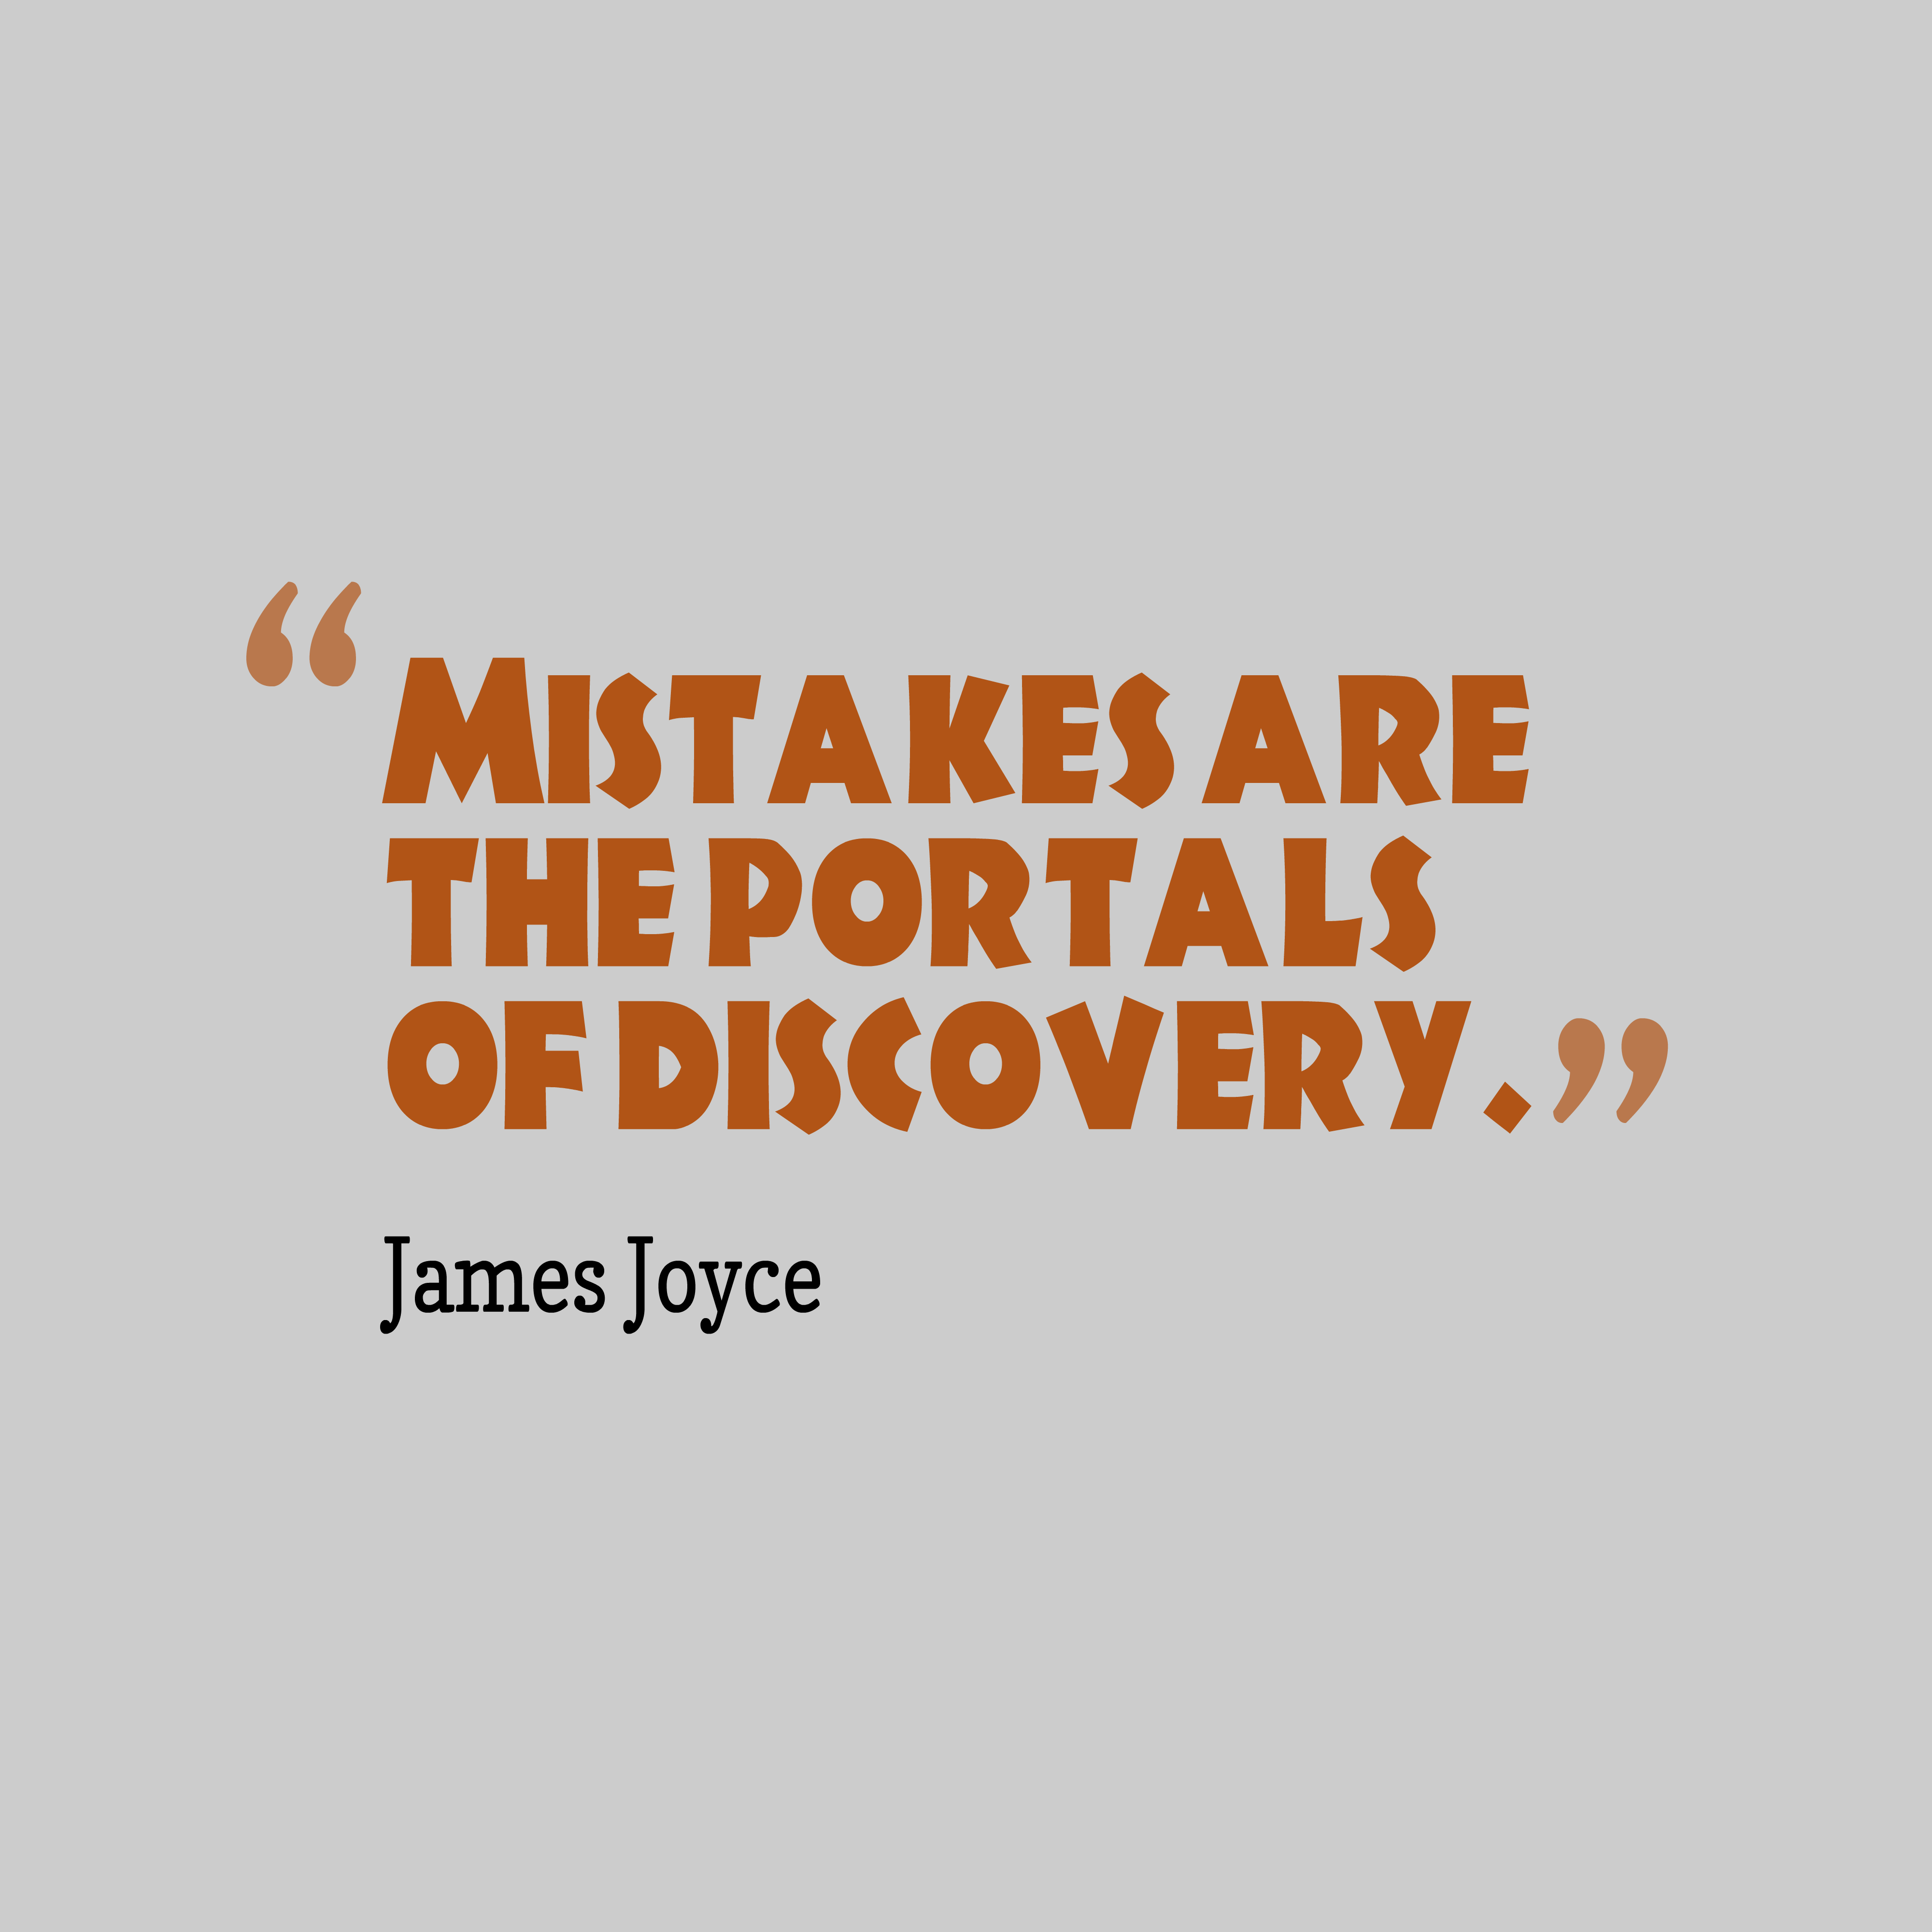 Mistakes are the portals of discovery. James Joyce